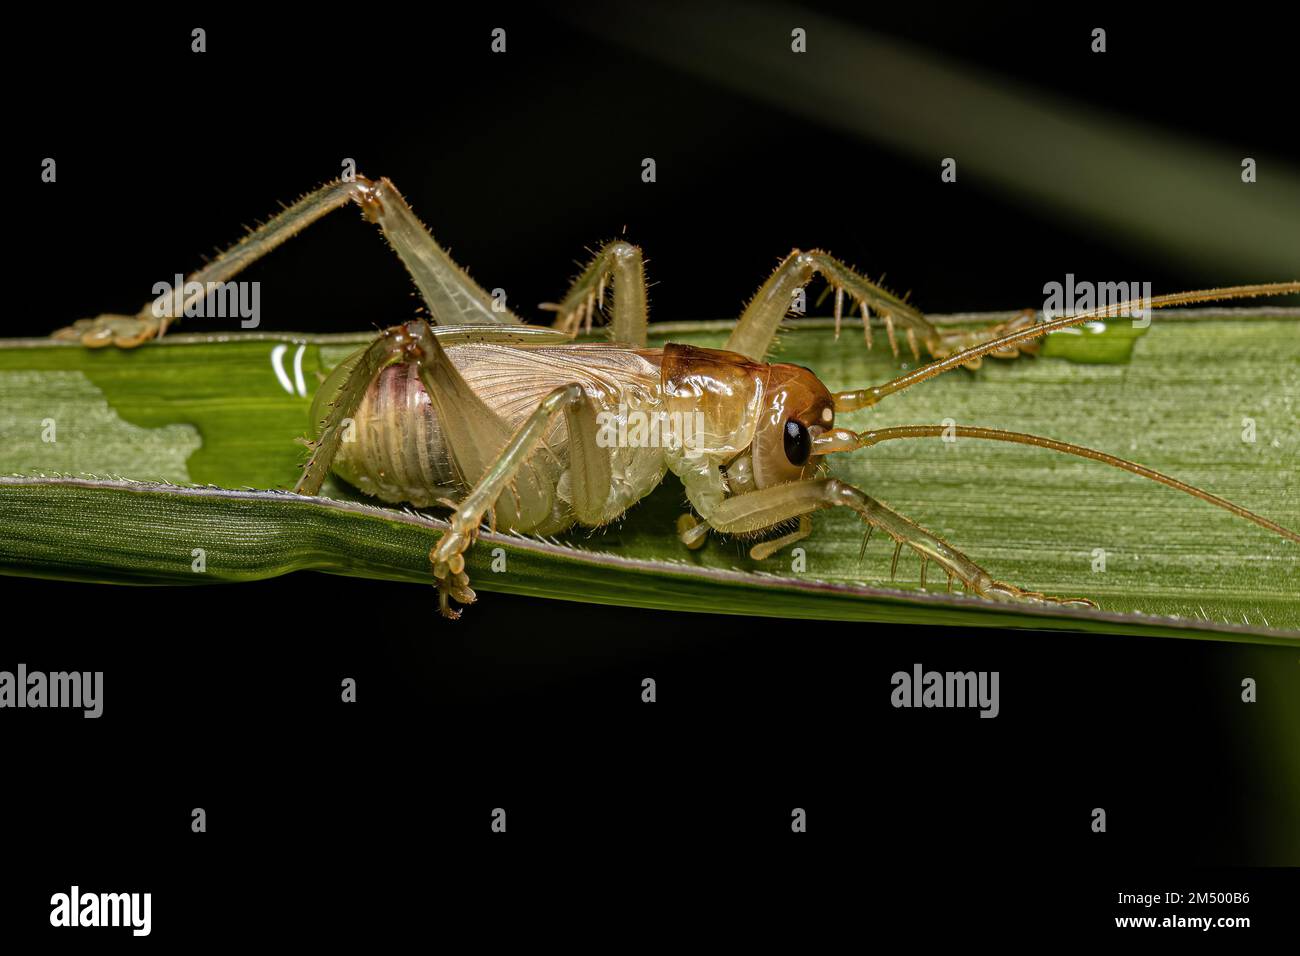 Male Raspy Cricket Nymph of the Family Gryllacrididae Stock Photo